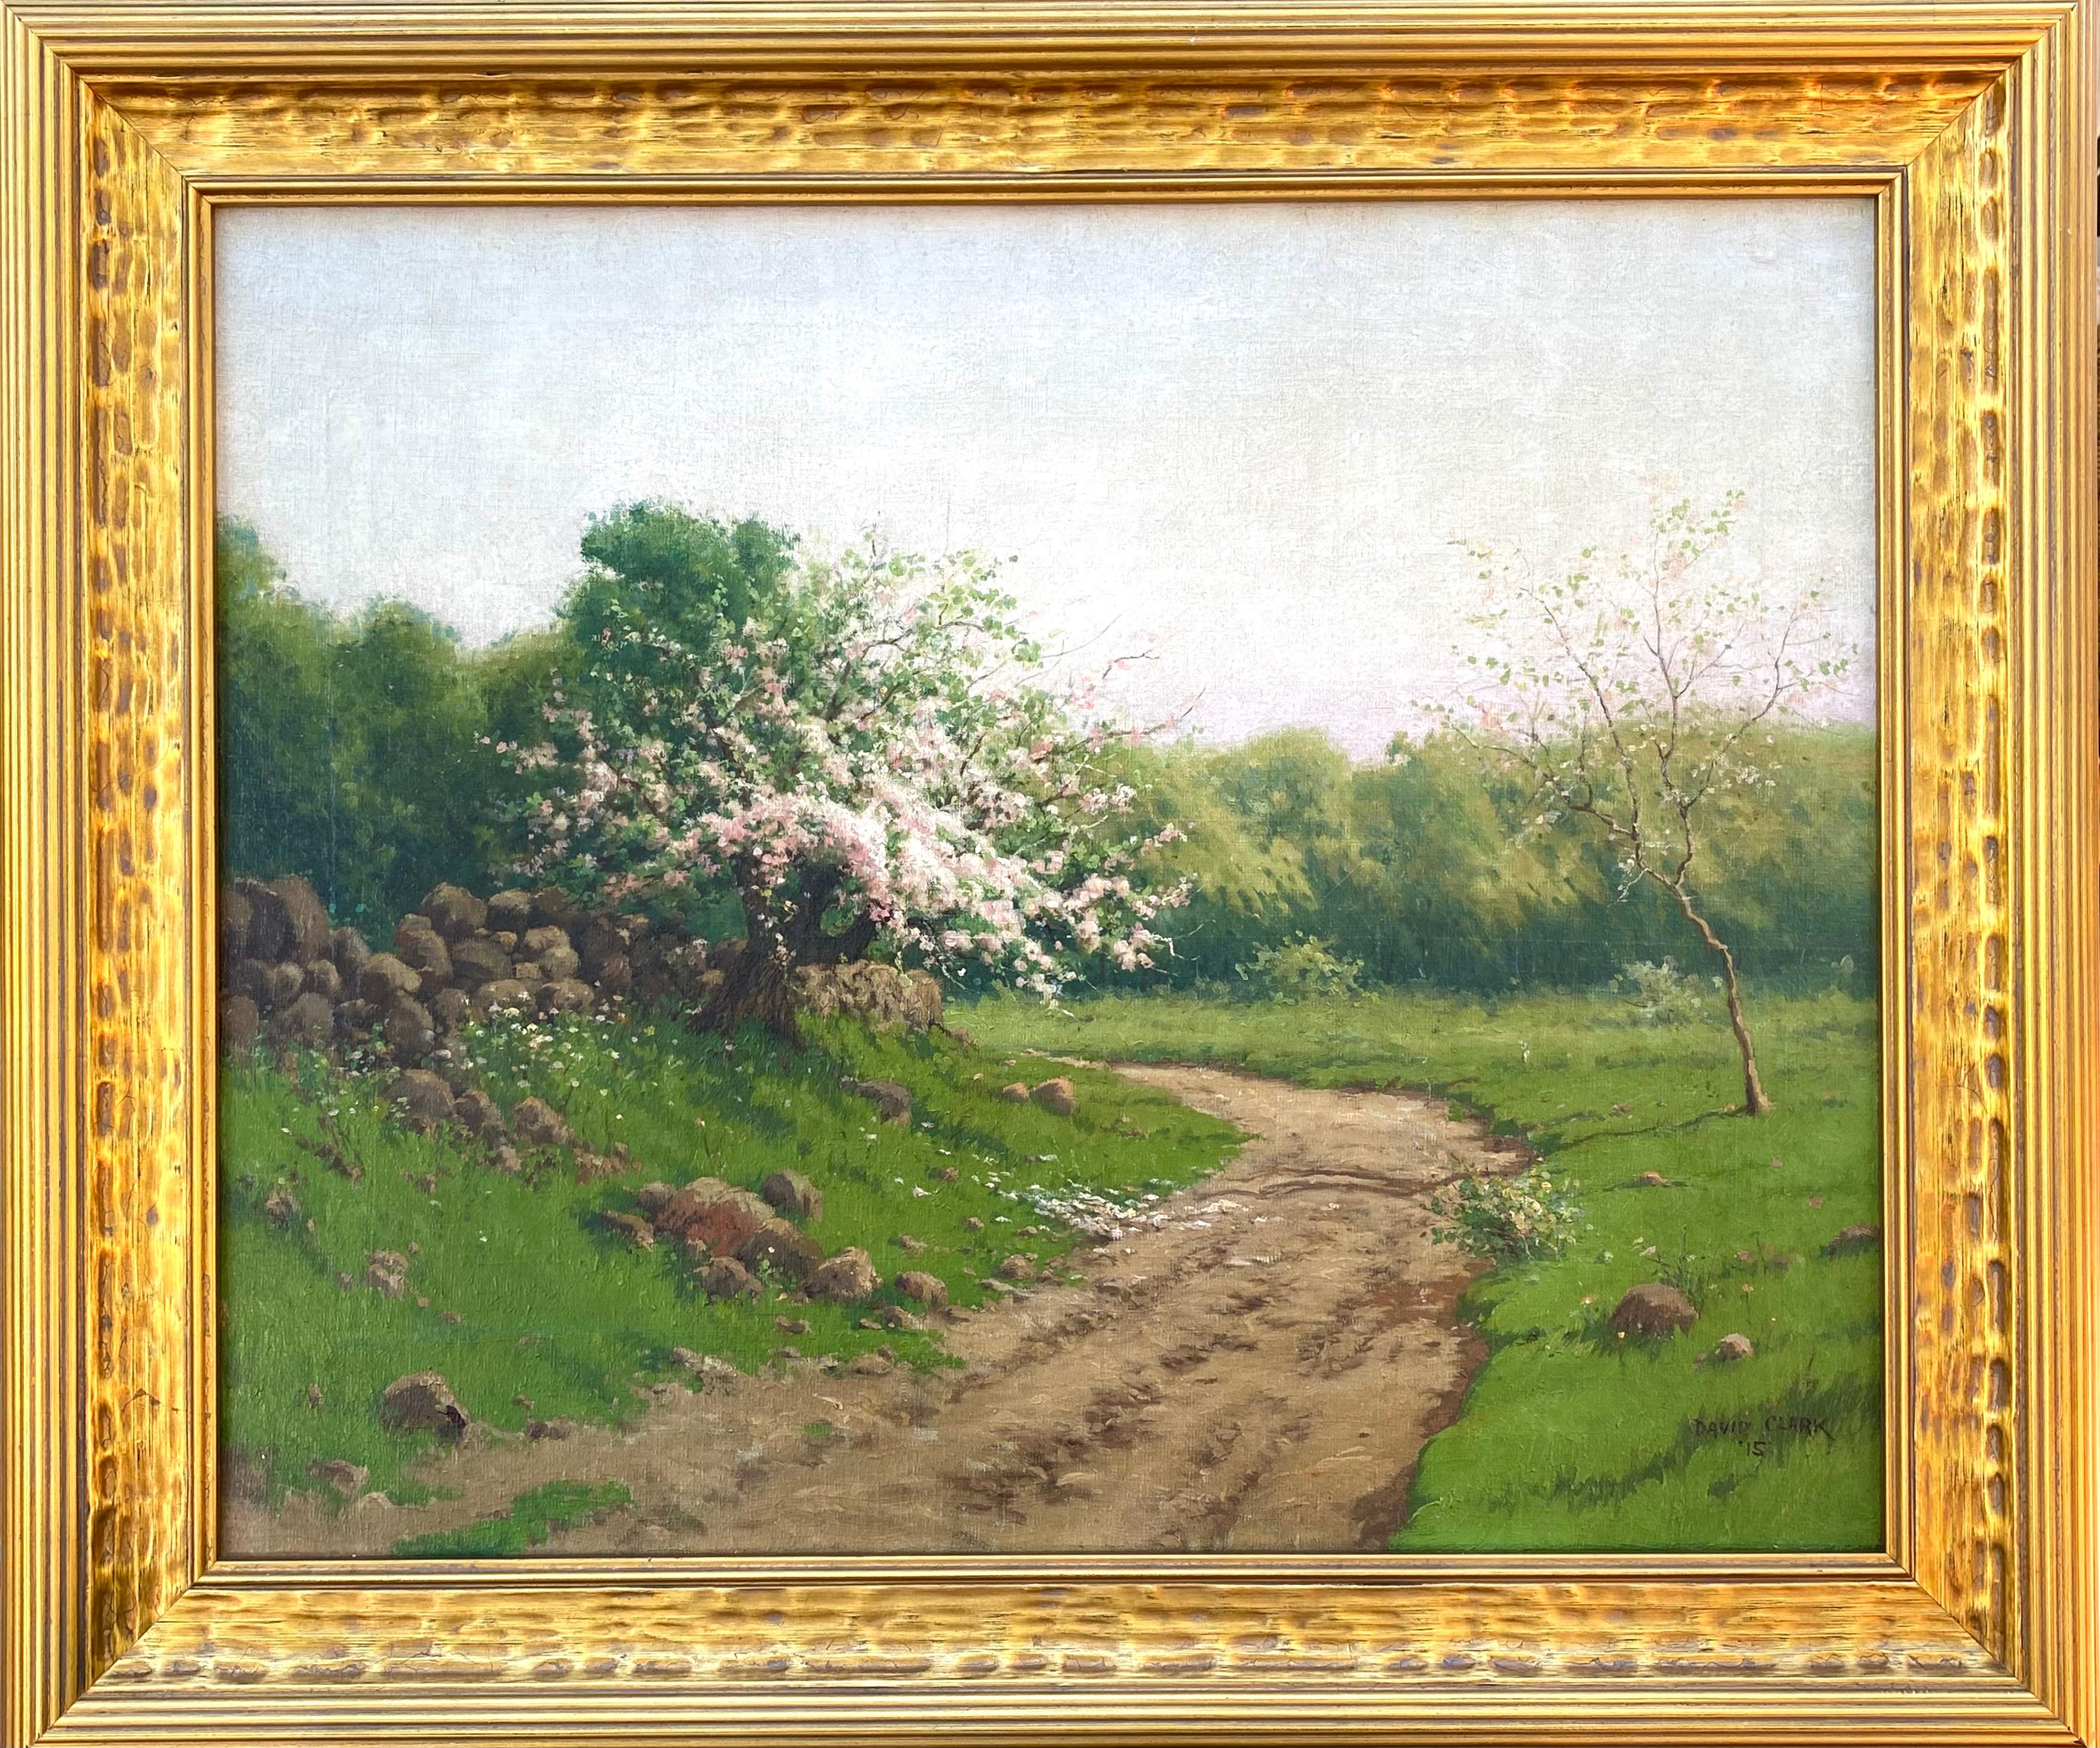 “Apple Blossom Time” - Painting by David Clark